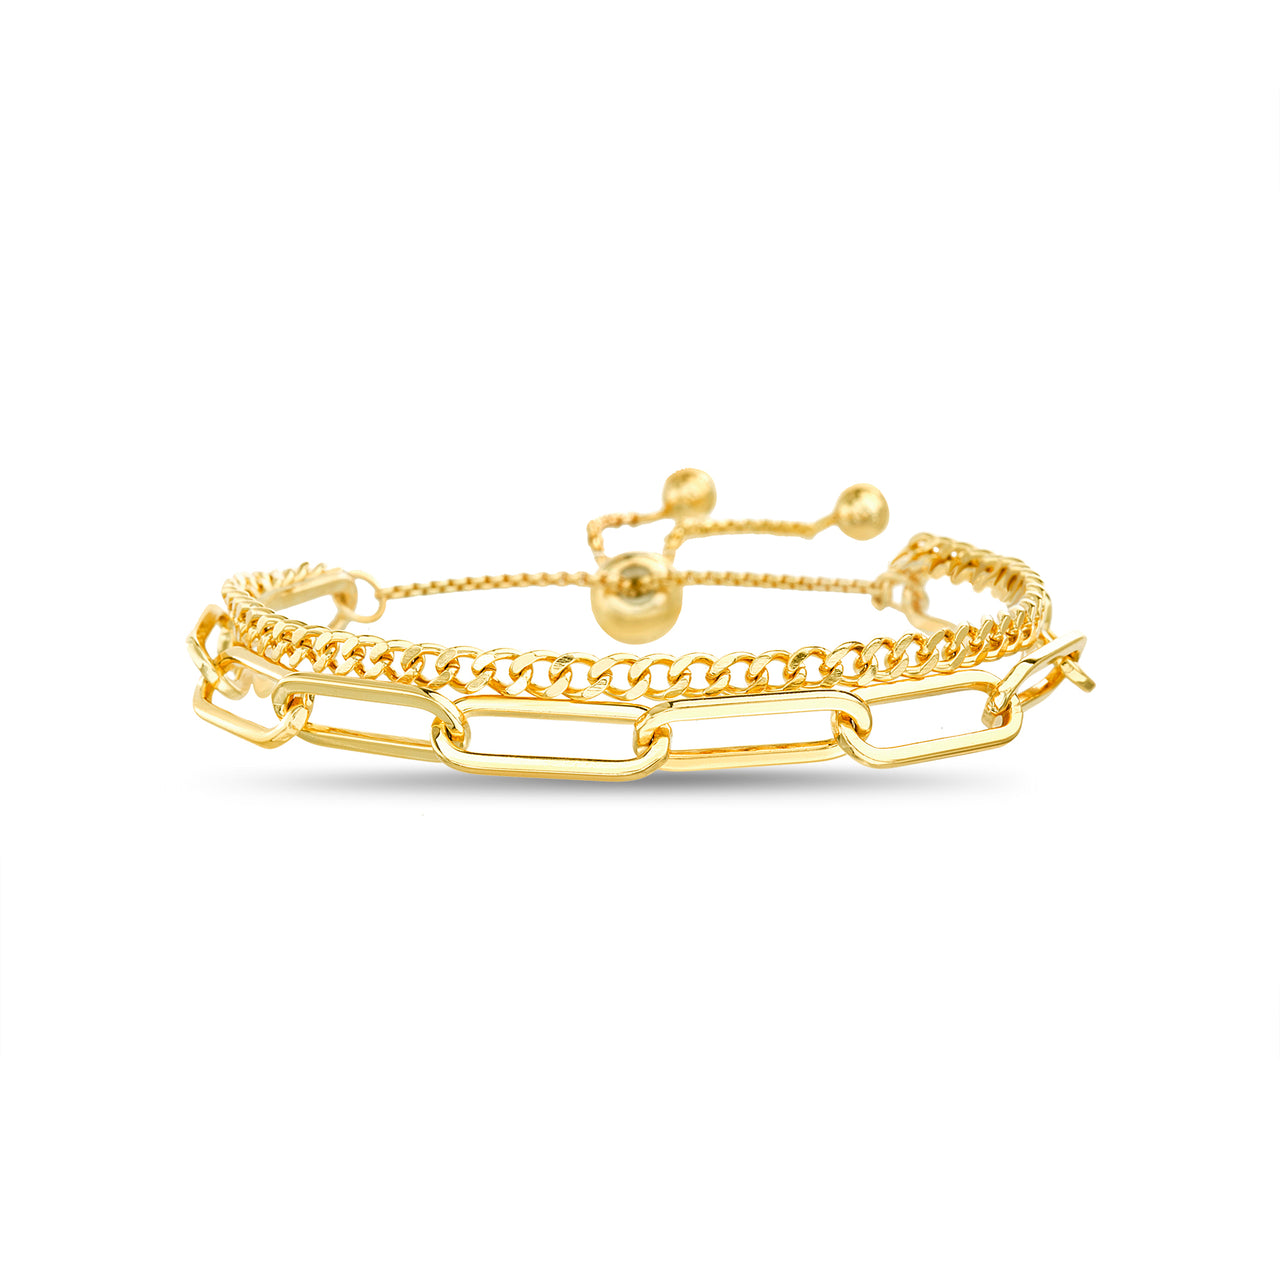 Lesa Michele Curb Chain Link Chain Double Bracelet in Yellow Gold Plated Brass